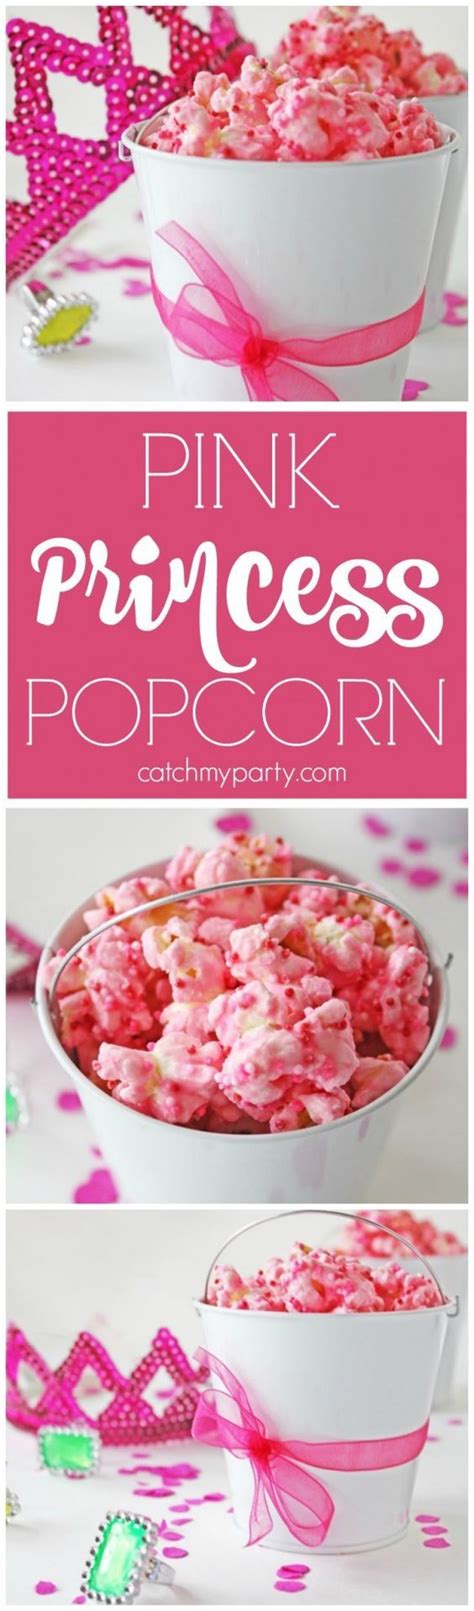 Easy Budget Friendly Pink Princess Popcorn Treat This Is A Great Birthday Party Dessert Looks